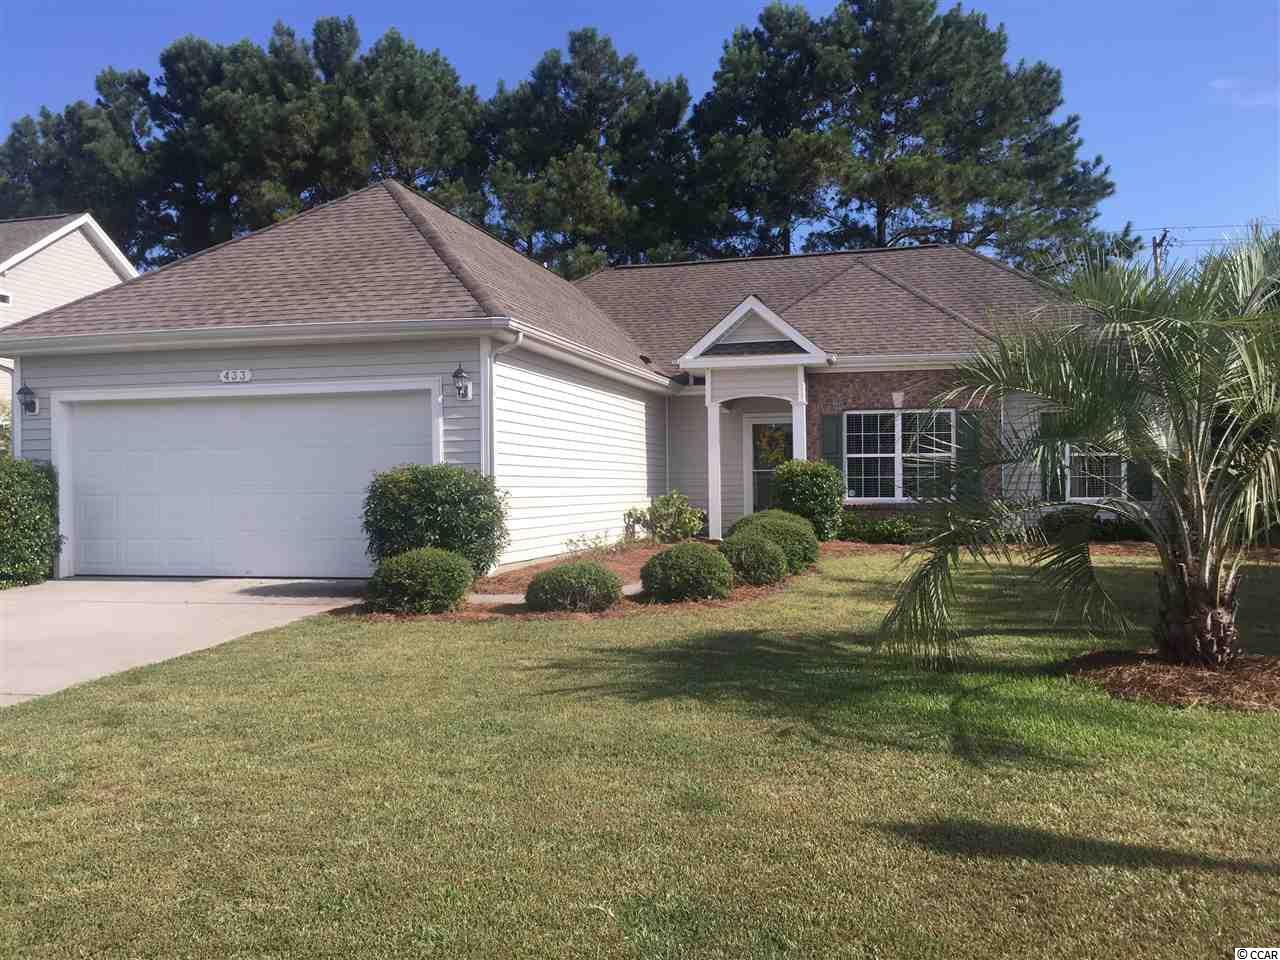 433 Carriage Lake Dr. Little River, SC 29566